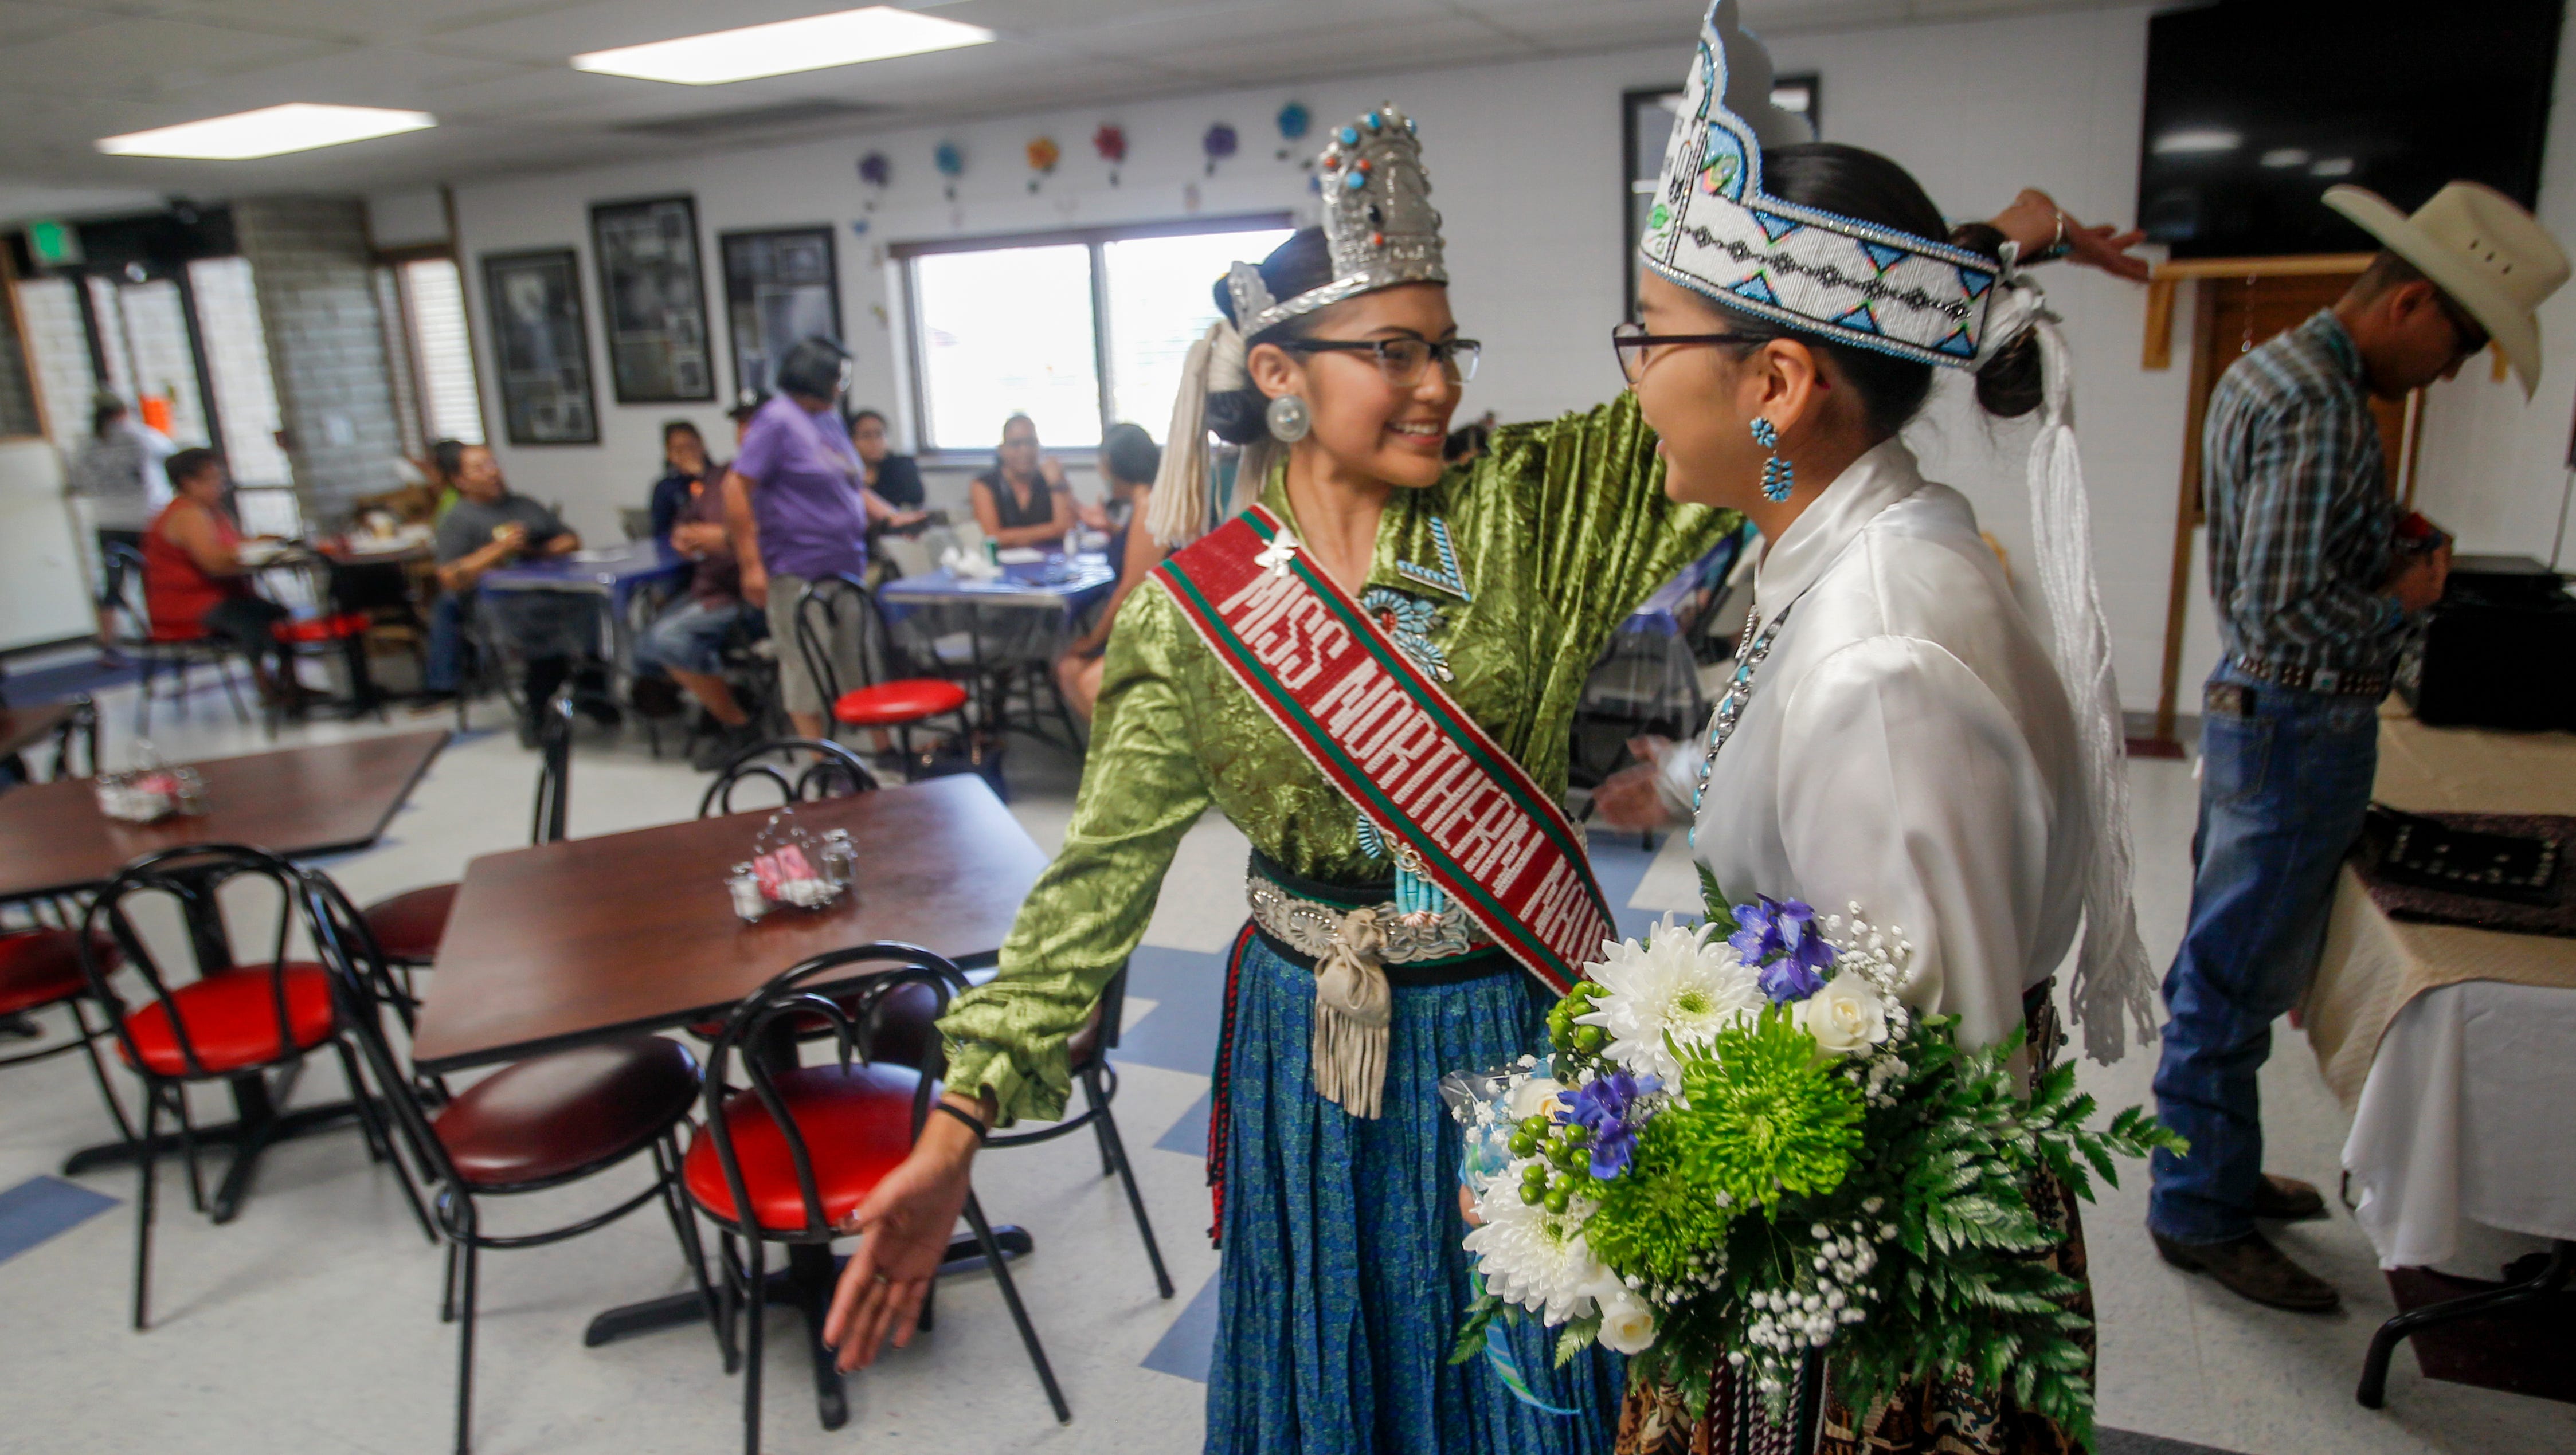 Miss Northern Navajo Ariana Roselyn Young, left, reaches out to hug Farmington American Indian Ambassador Nikeisha Kee Thursday during a ceremony at the Farmington Indian Center.